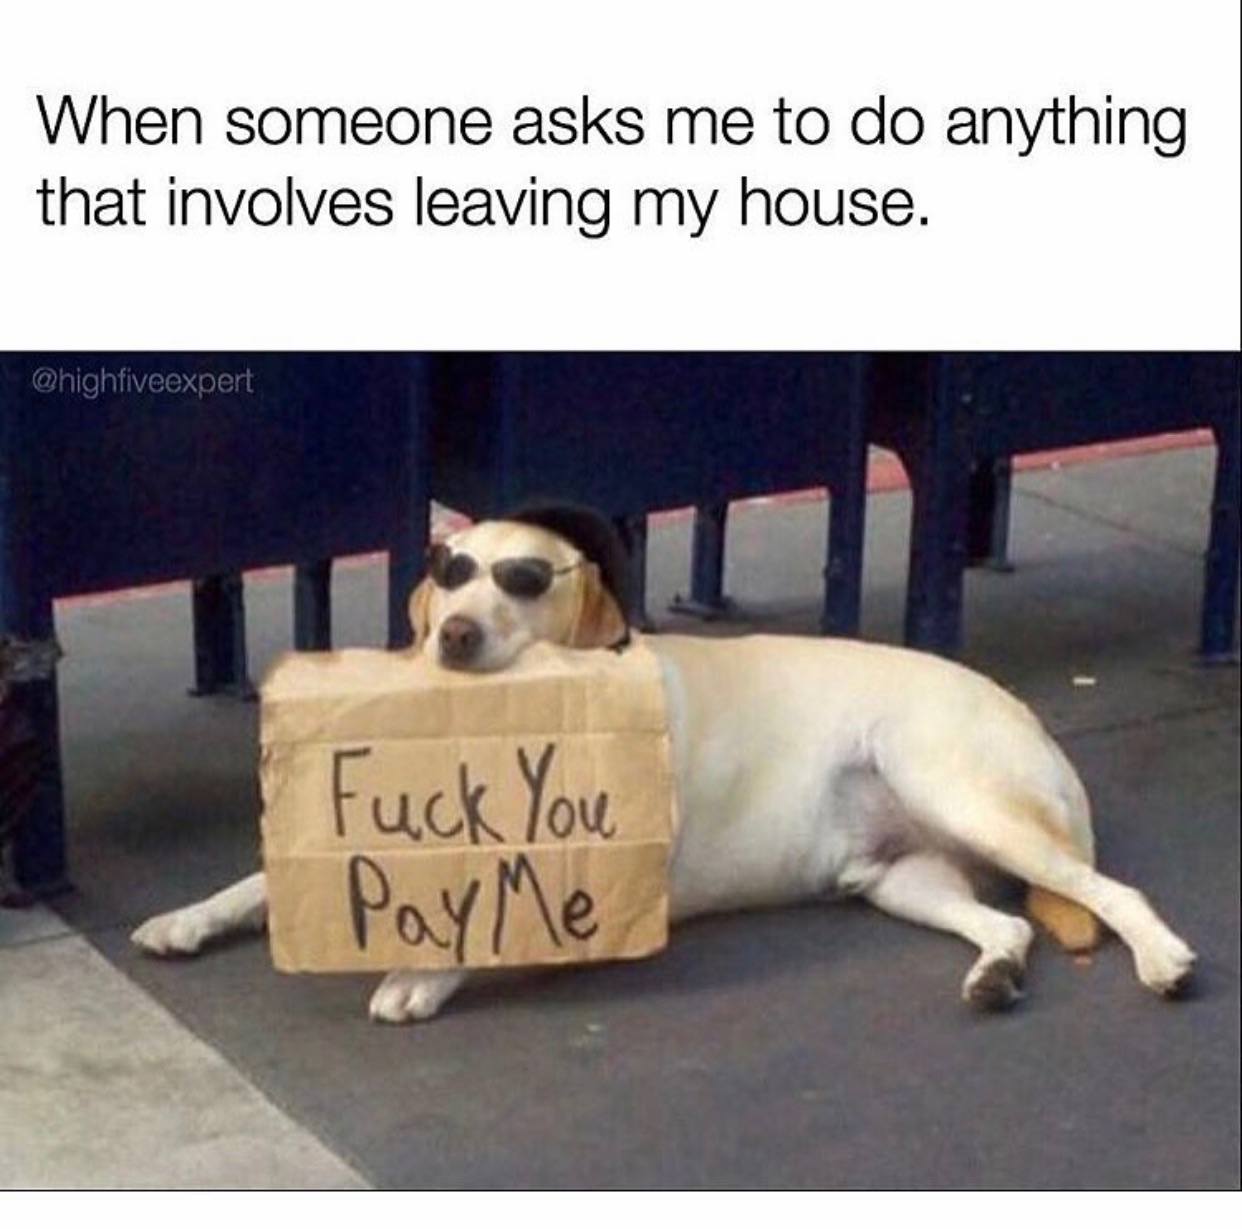 memes - fuck you pay me dog meme - When someone asks me to do anything that involves leaving my house. Fuck You Payme